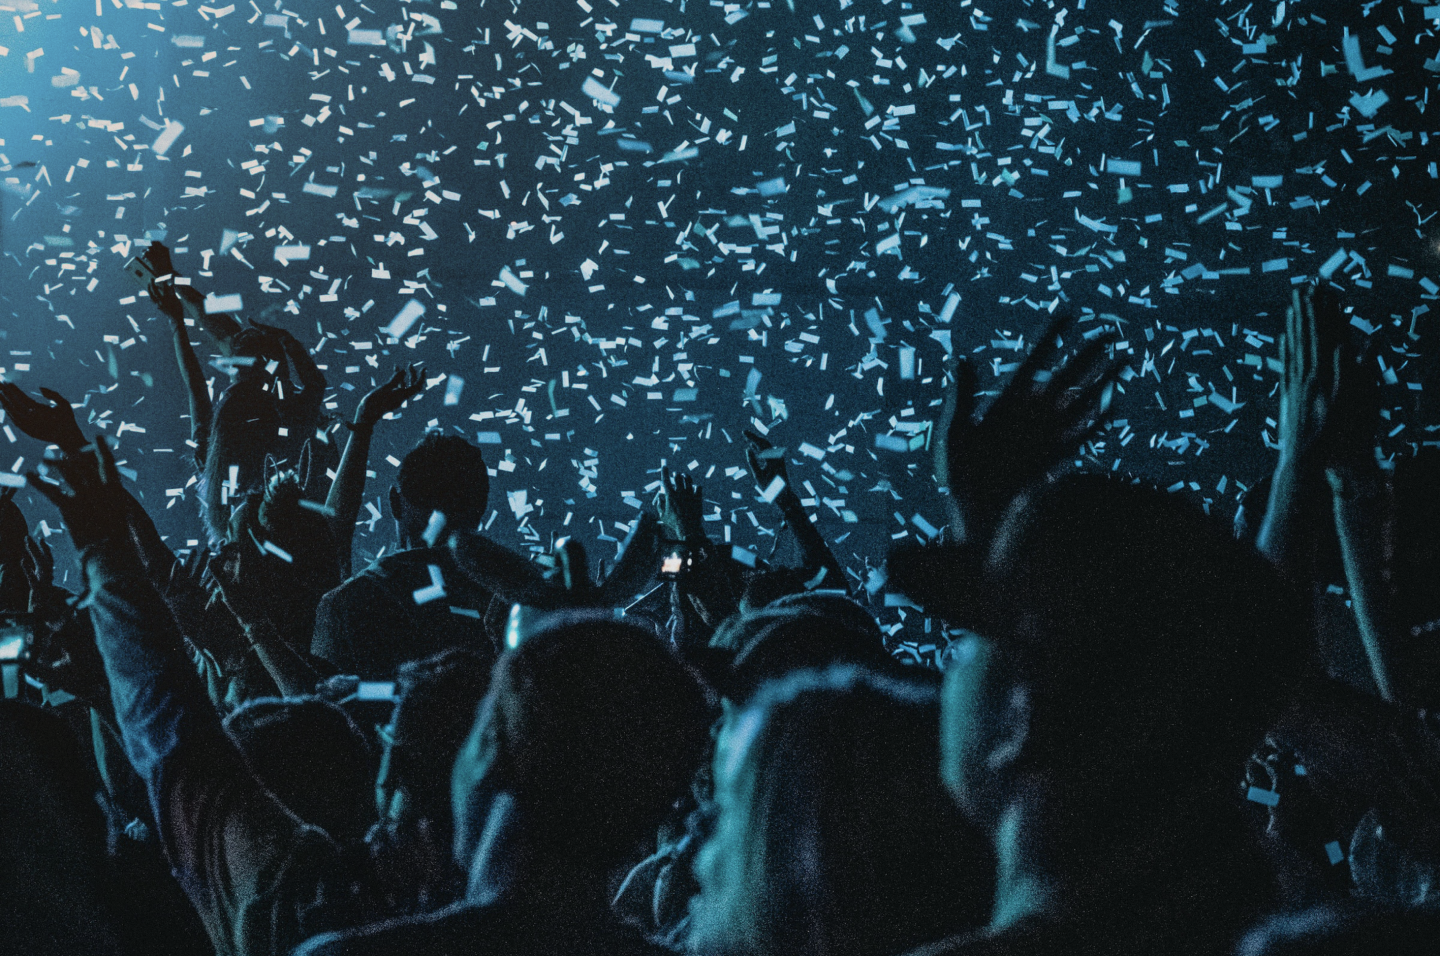 Paper confetti flying through a sea of people at a live music concert at night